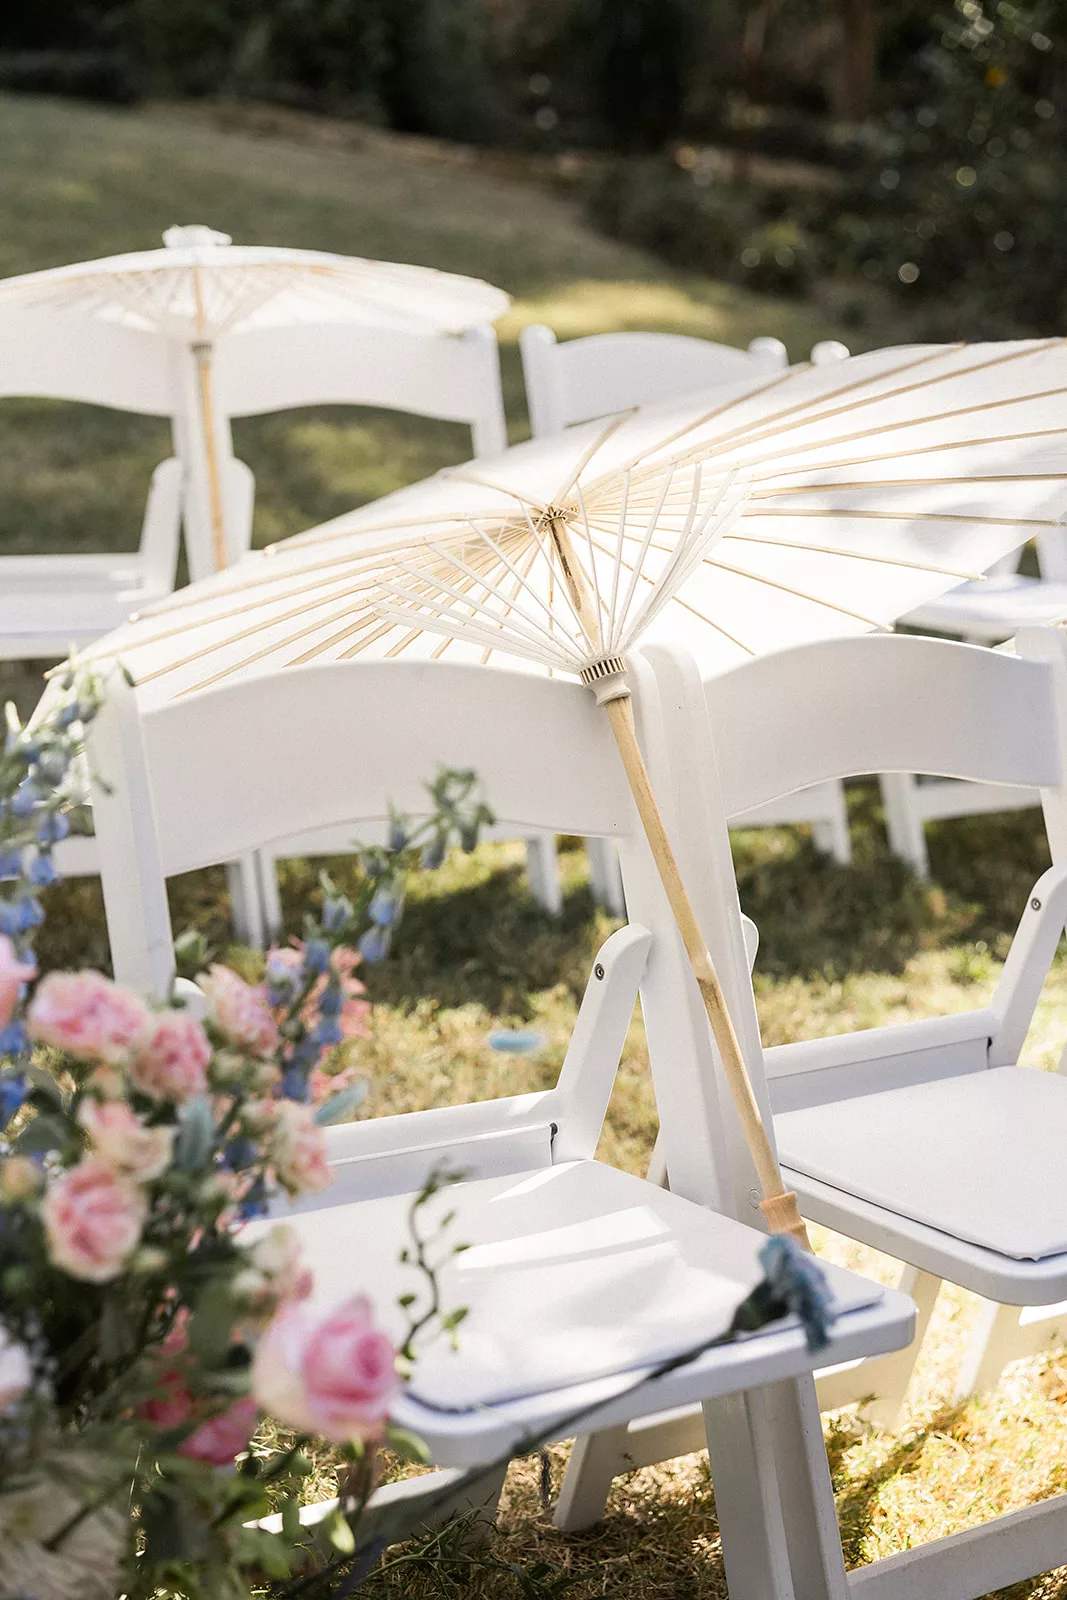 An umbrella rests on a chair in a Wildflower 301 wedding reception